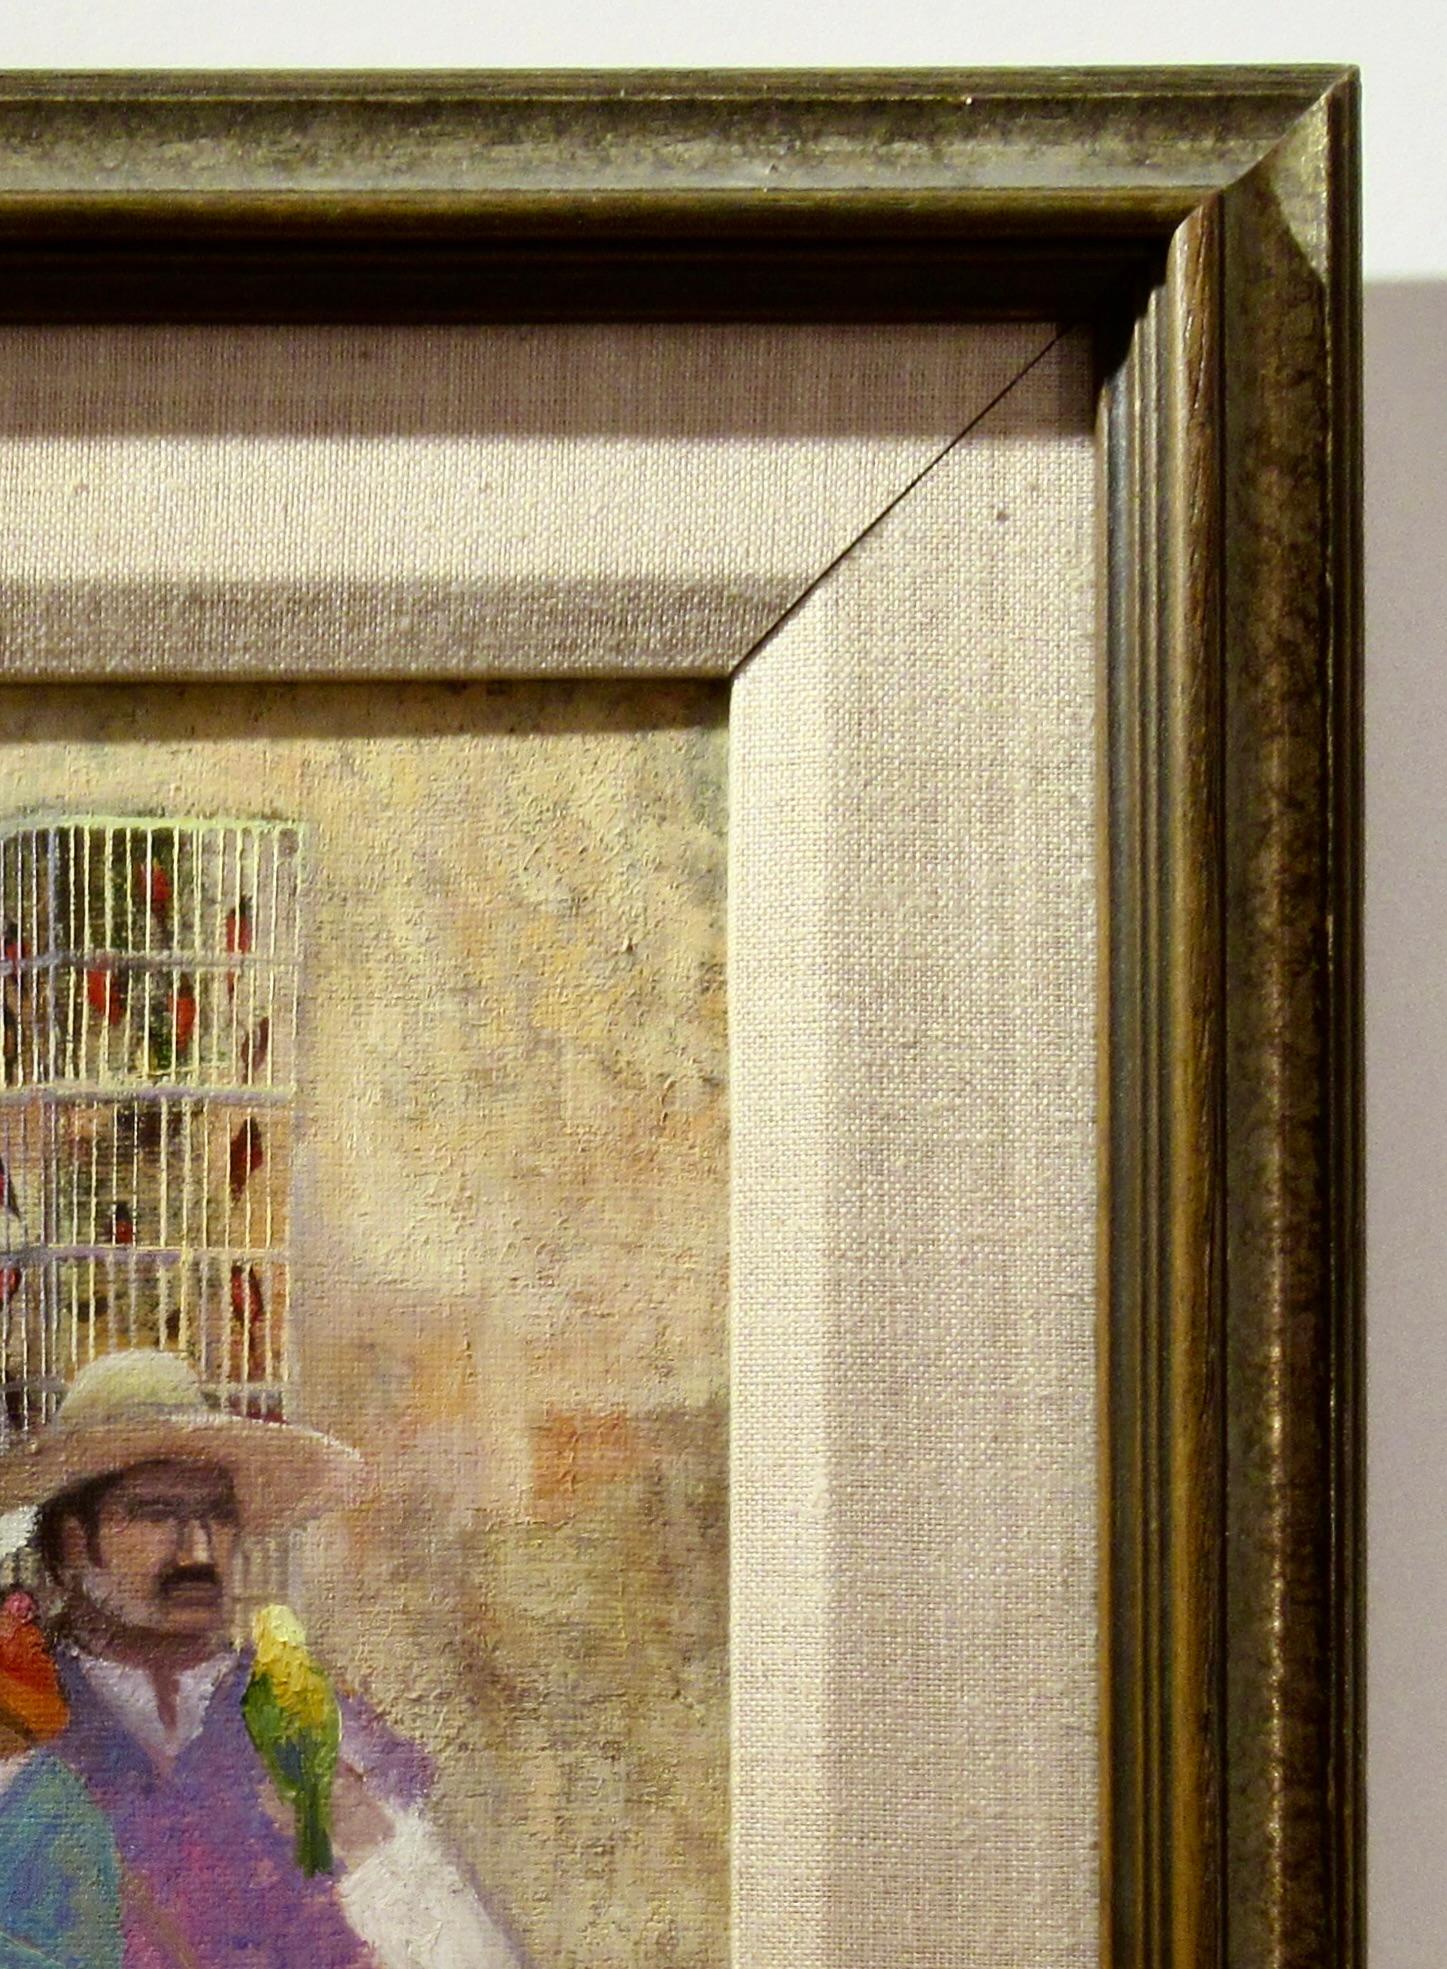 Mexican Couple with Baby and Birds Cage - Impressionist Painting by Antonio Vasquez Parra